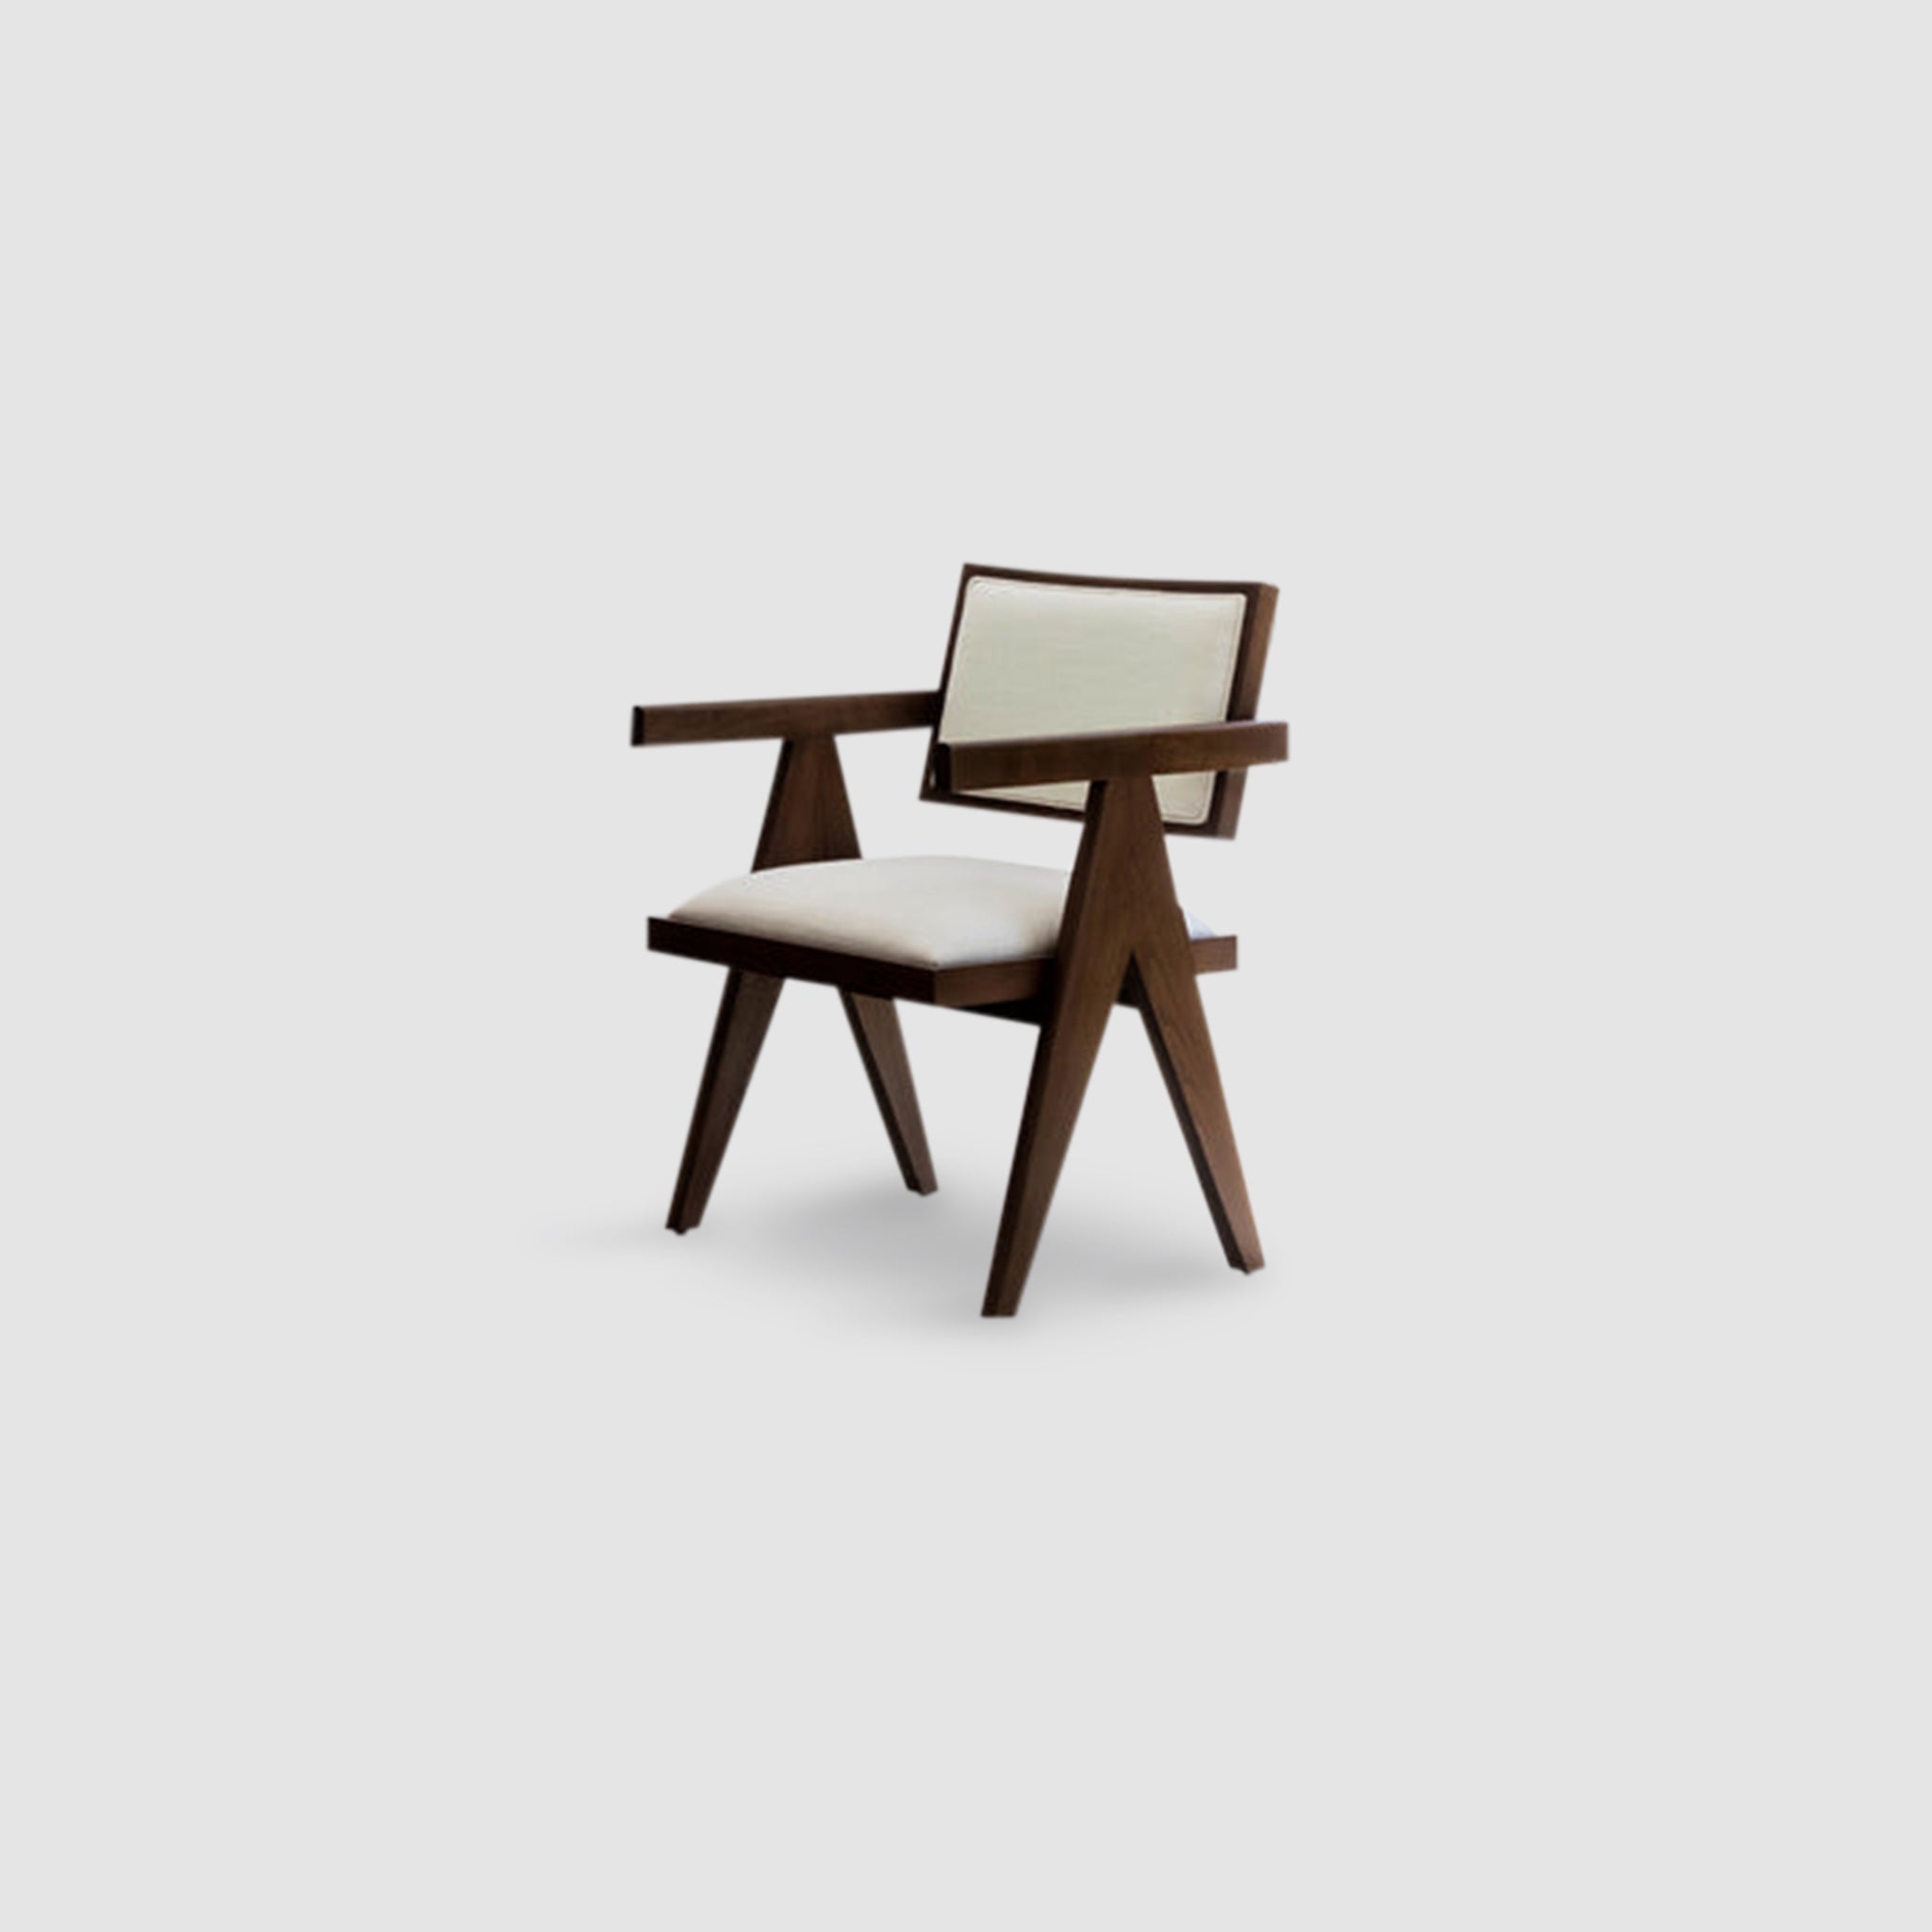 "The Pierre Dining Chair with beige cushions and a wooden structure."